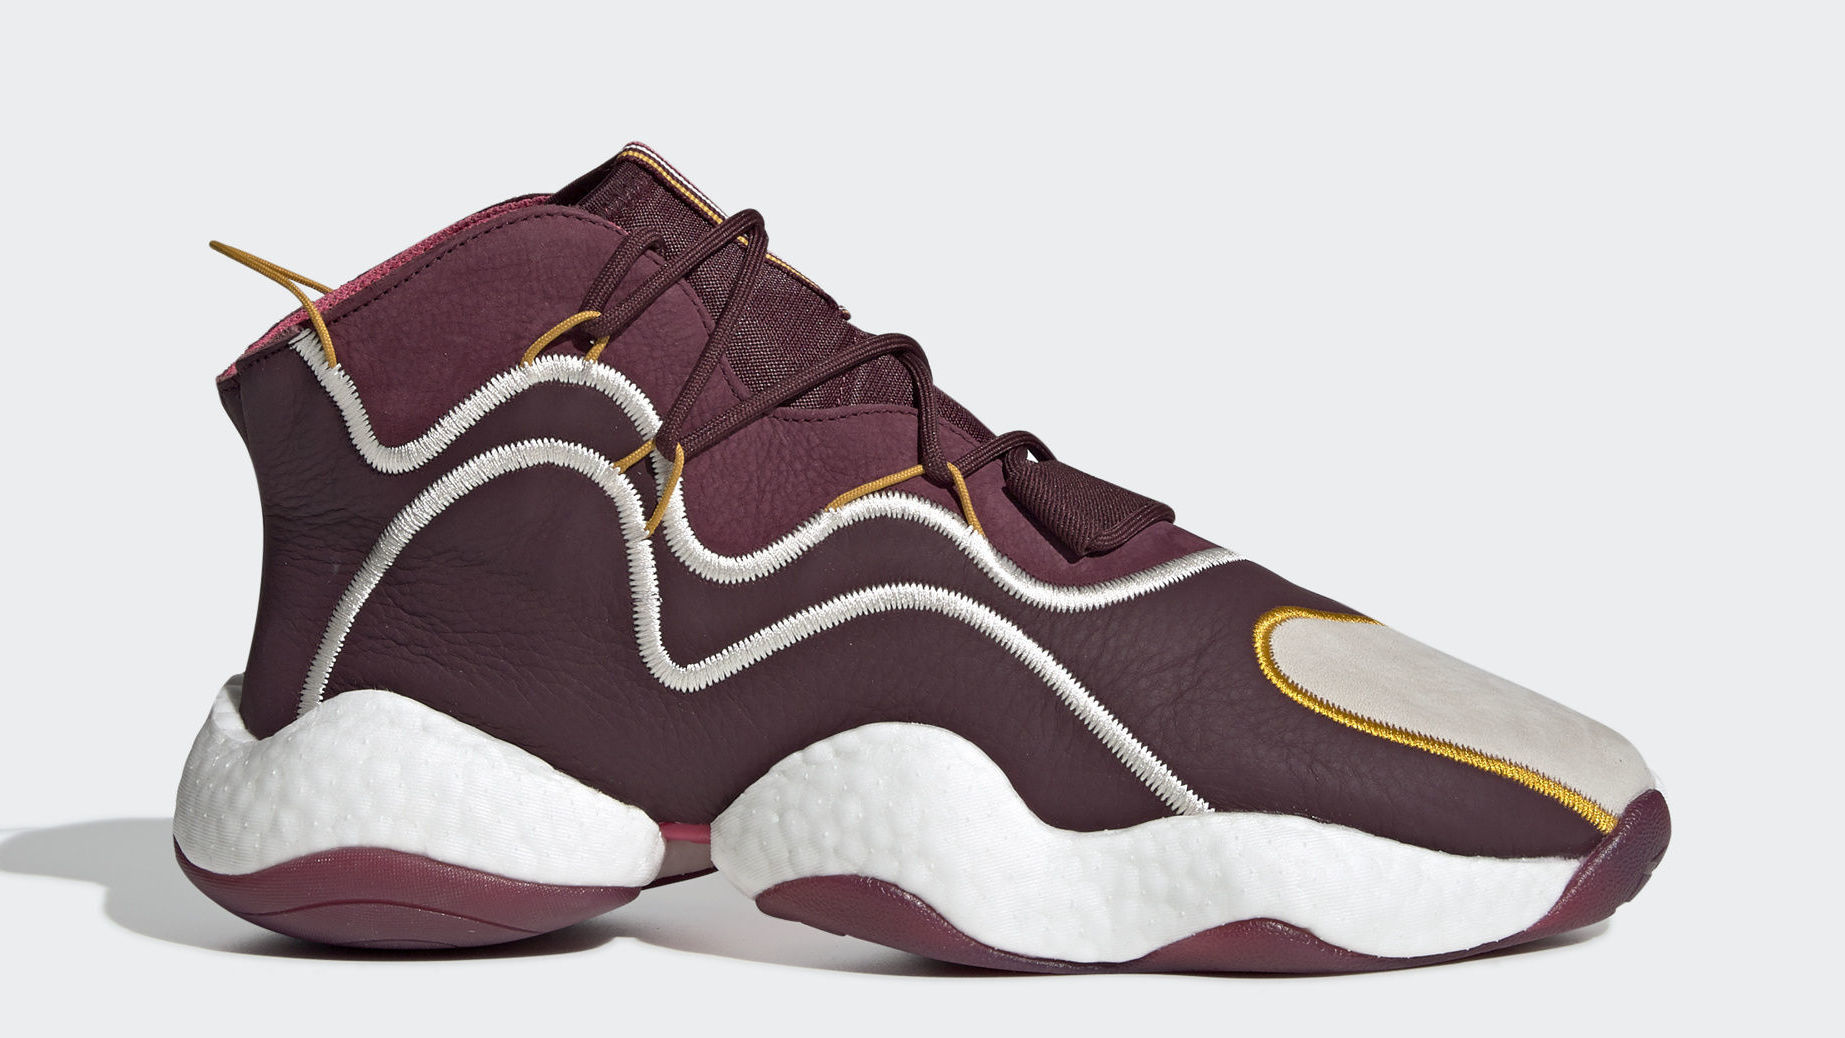 eric emanuel adidas crazy byw bd7242 lateral